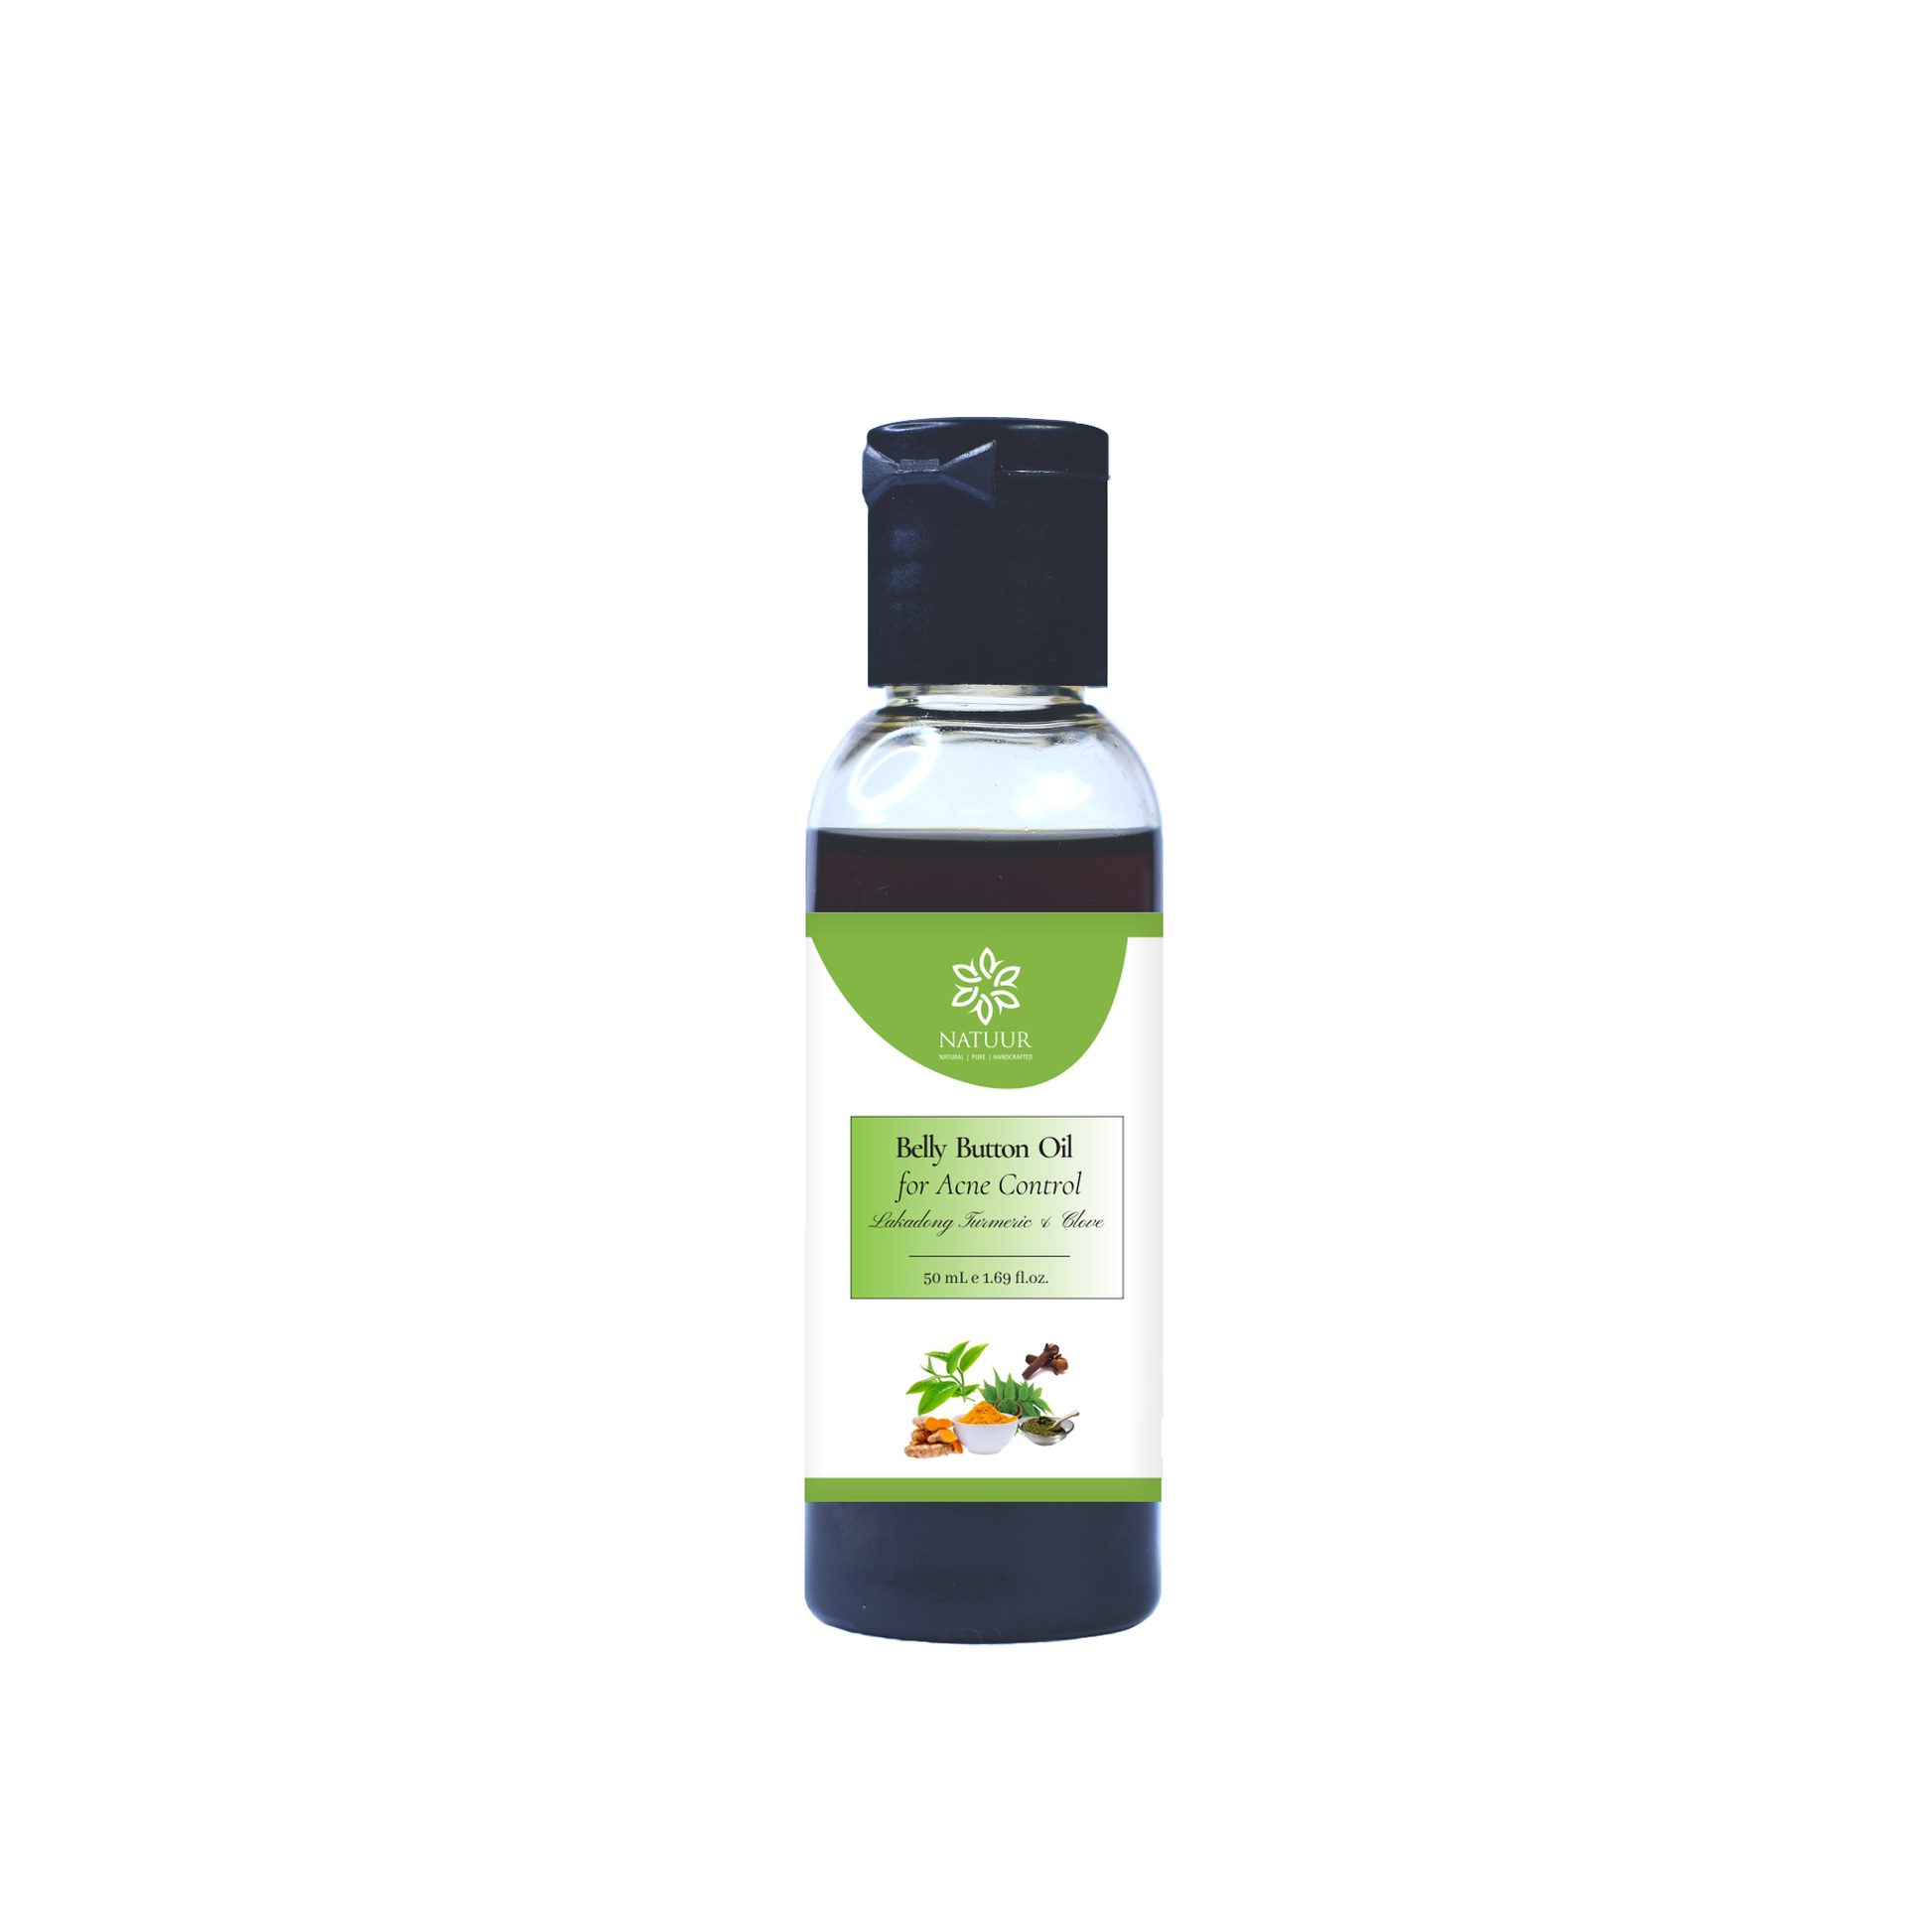 Belly Button Oil for Acne Control(50ml) - Natuur.in